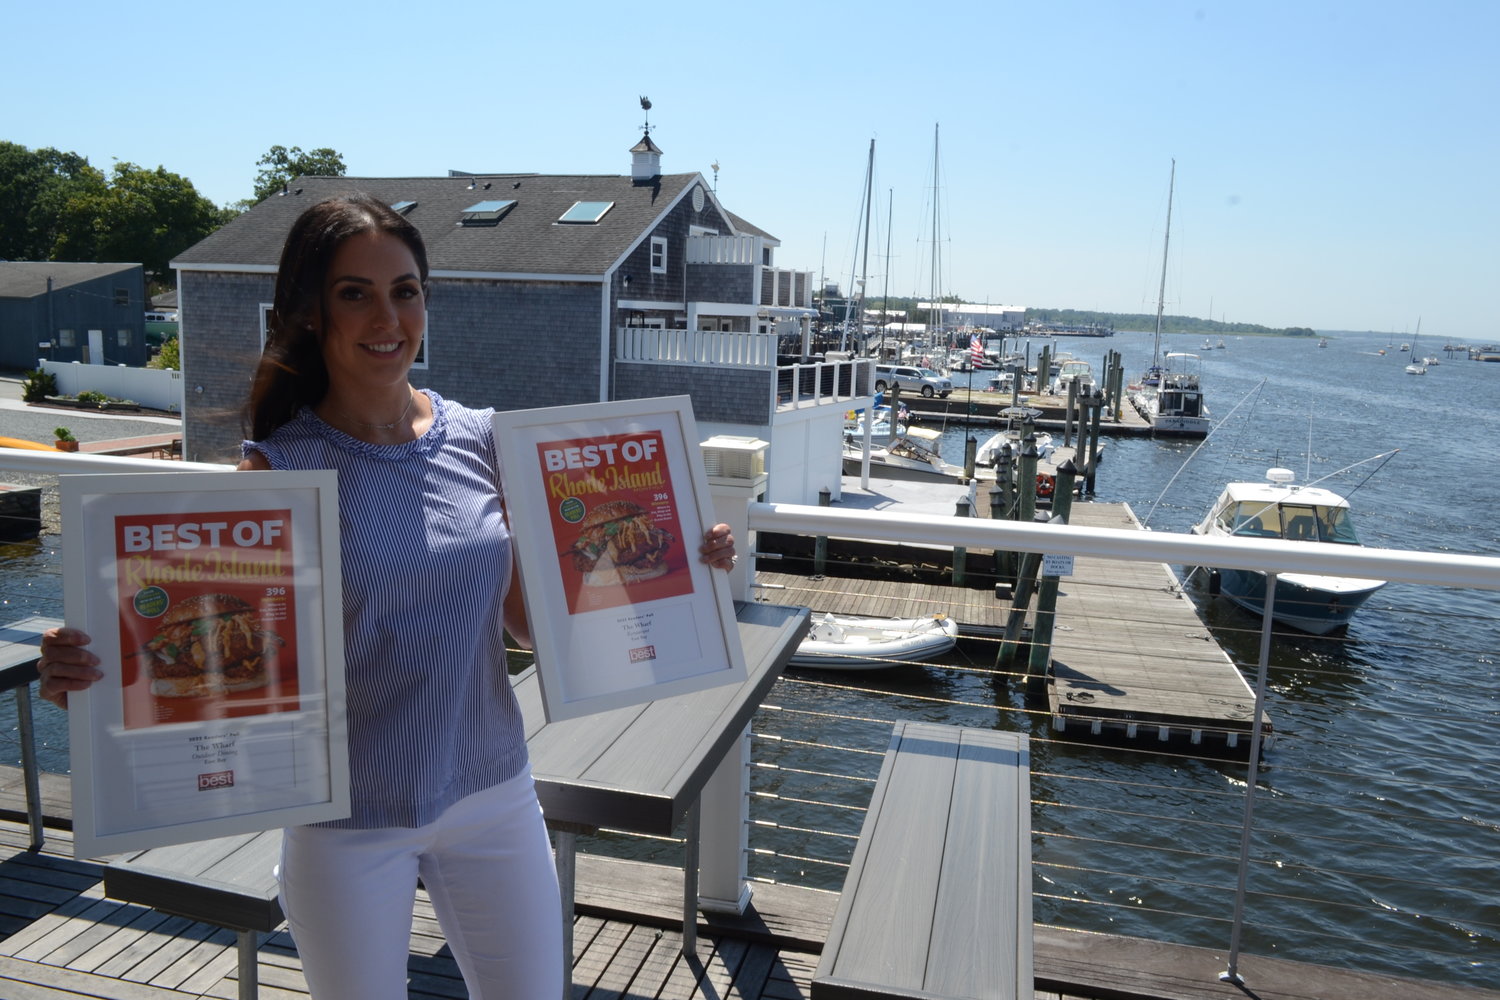 Marissa Ferris stands among the top deck of The Wharf, which she acquired with her husband four years ago. The stunning vista earned her the accolade of Best Outdoor Dining spot in the East Bay, and their improvements to the restaurant earned them the Best Restaurant in the East Bay award among much competition.